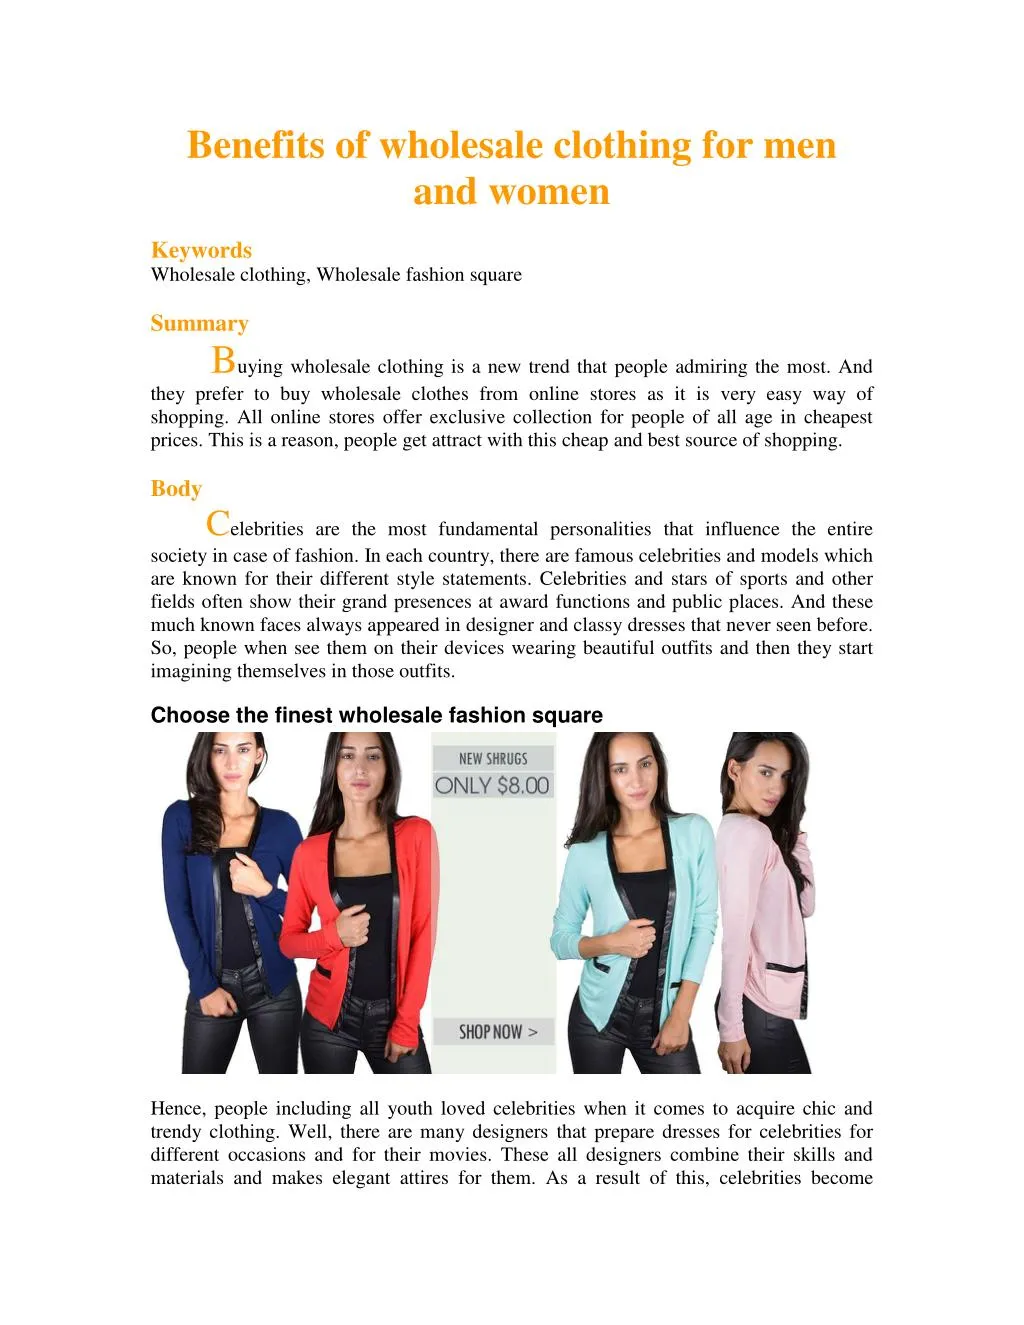 PPT - Benefits of wholesale clothing for men and women PowerPoint ...